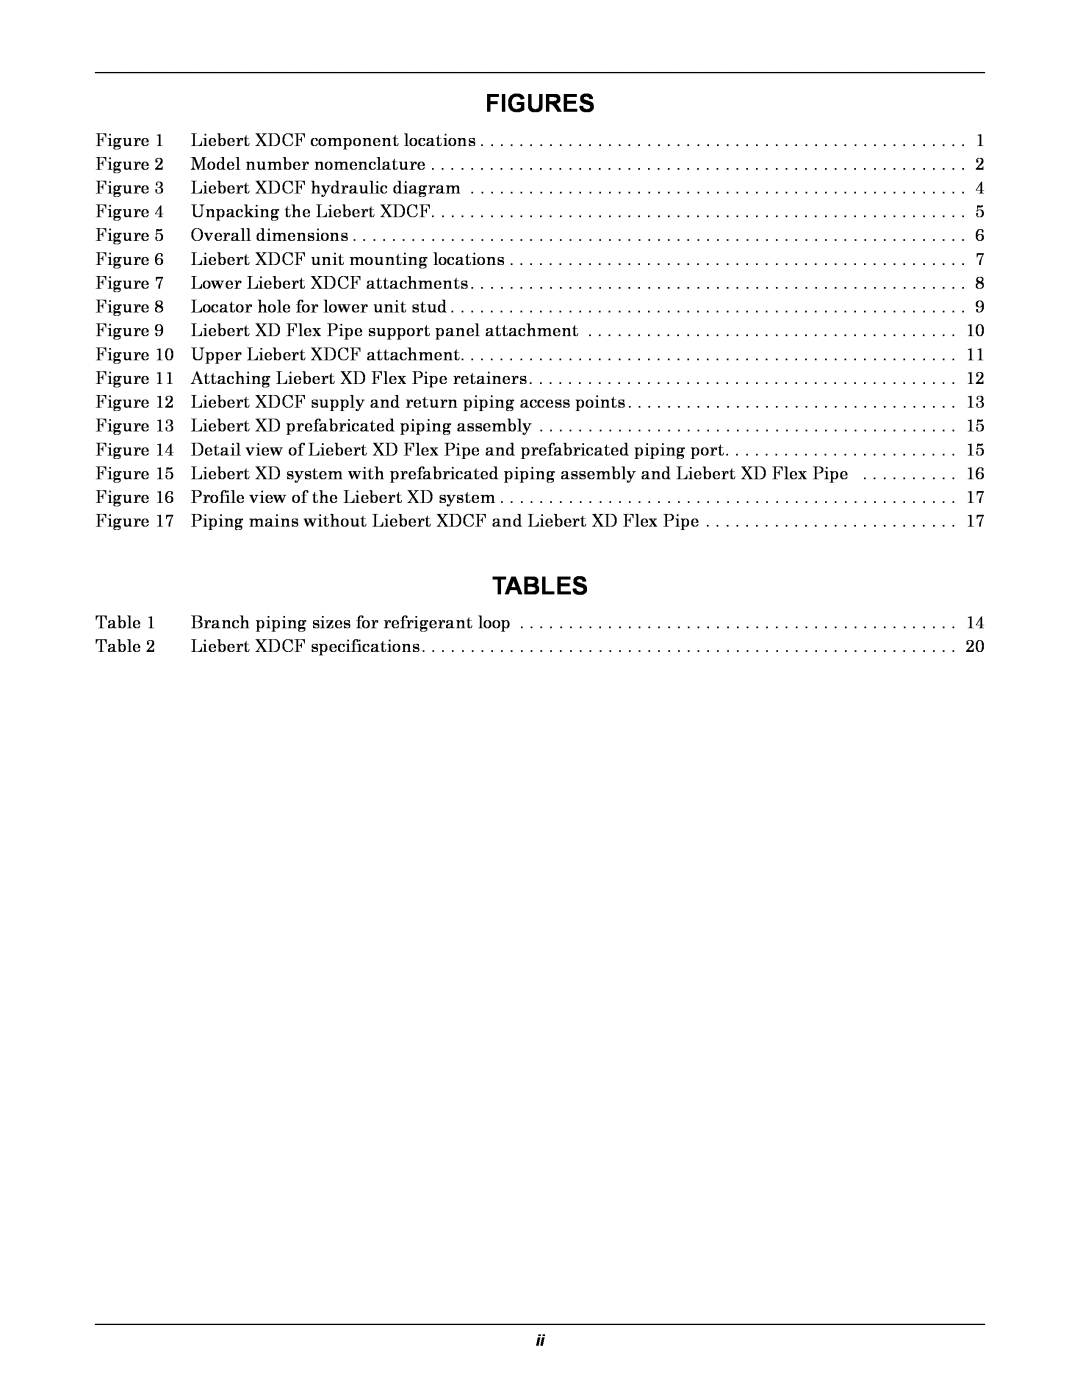 Emerson XDCF user manual Figures, Tables 